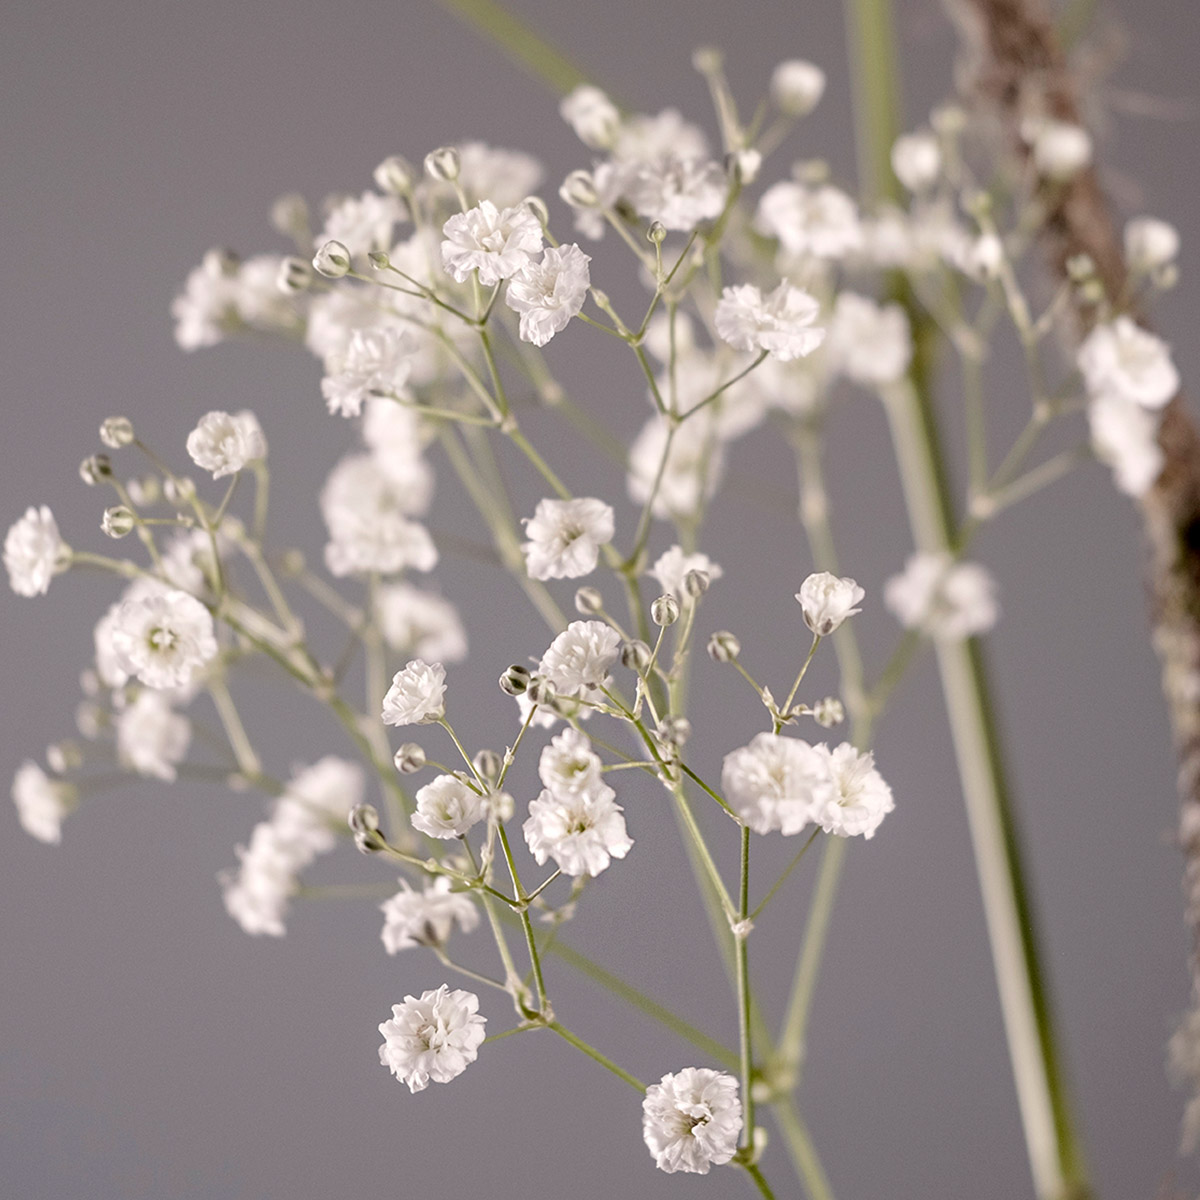 Gypsophila Grandtastic Is a Winner at Muchflowers feature - on Thursd